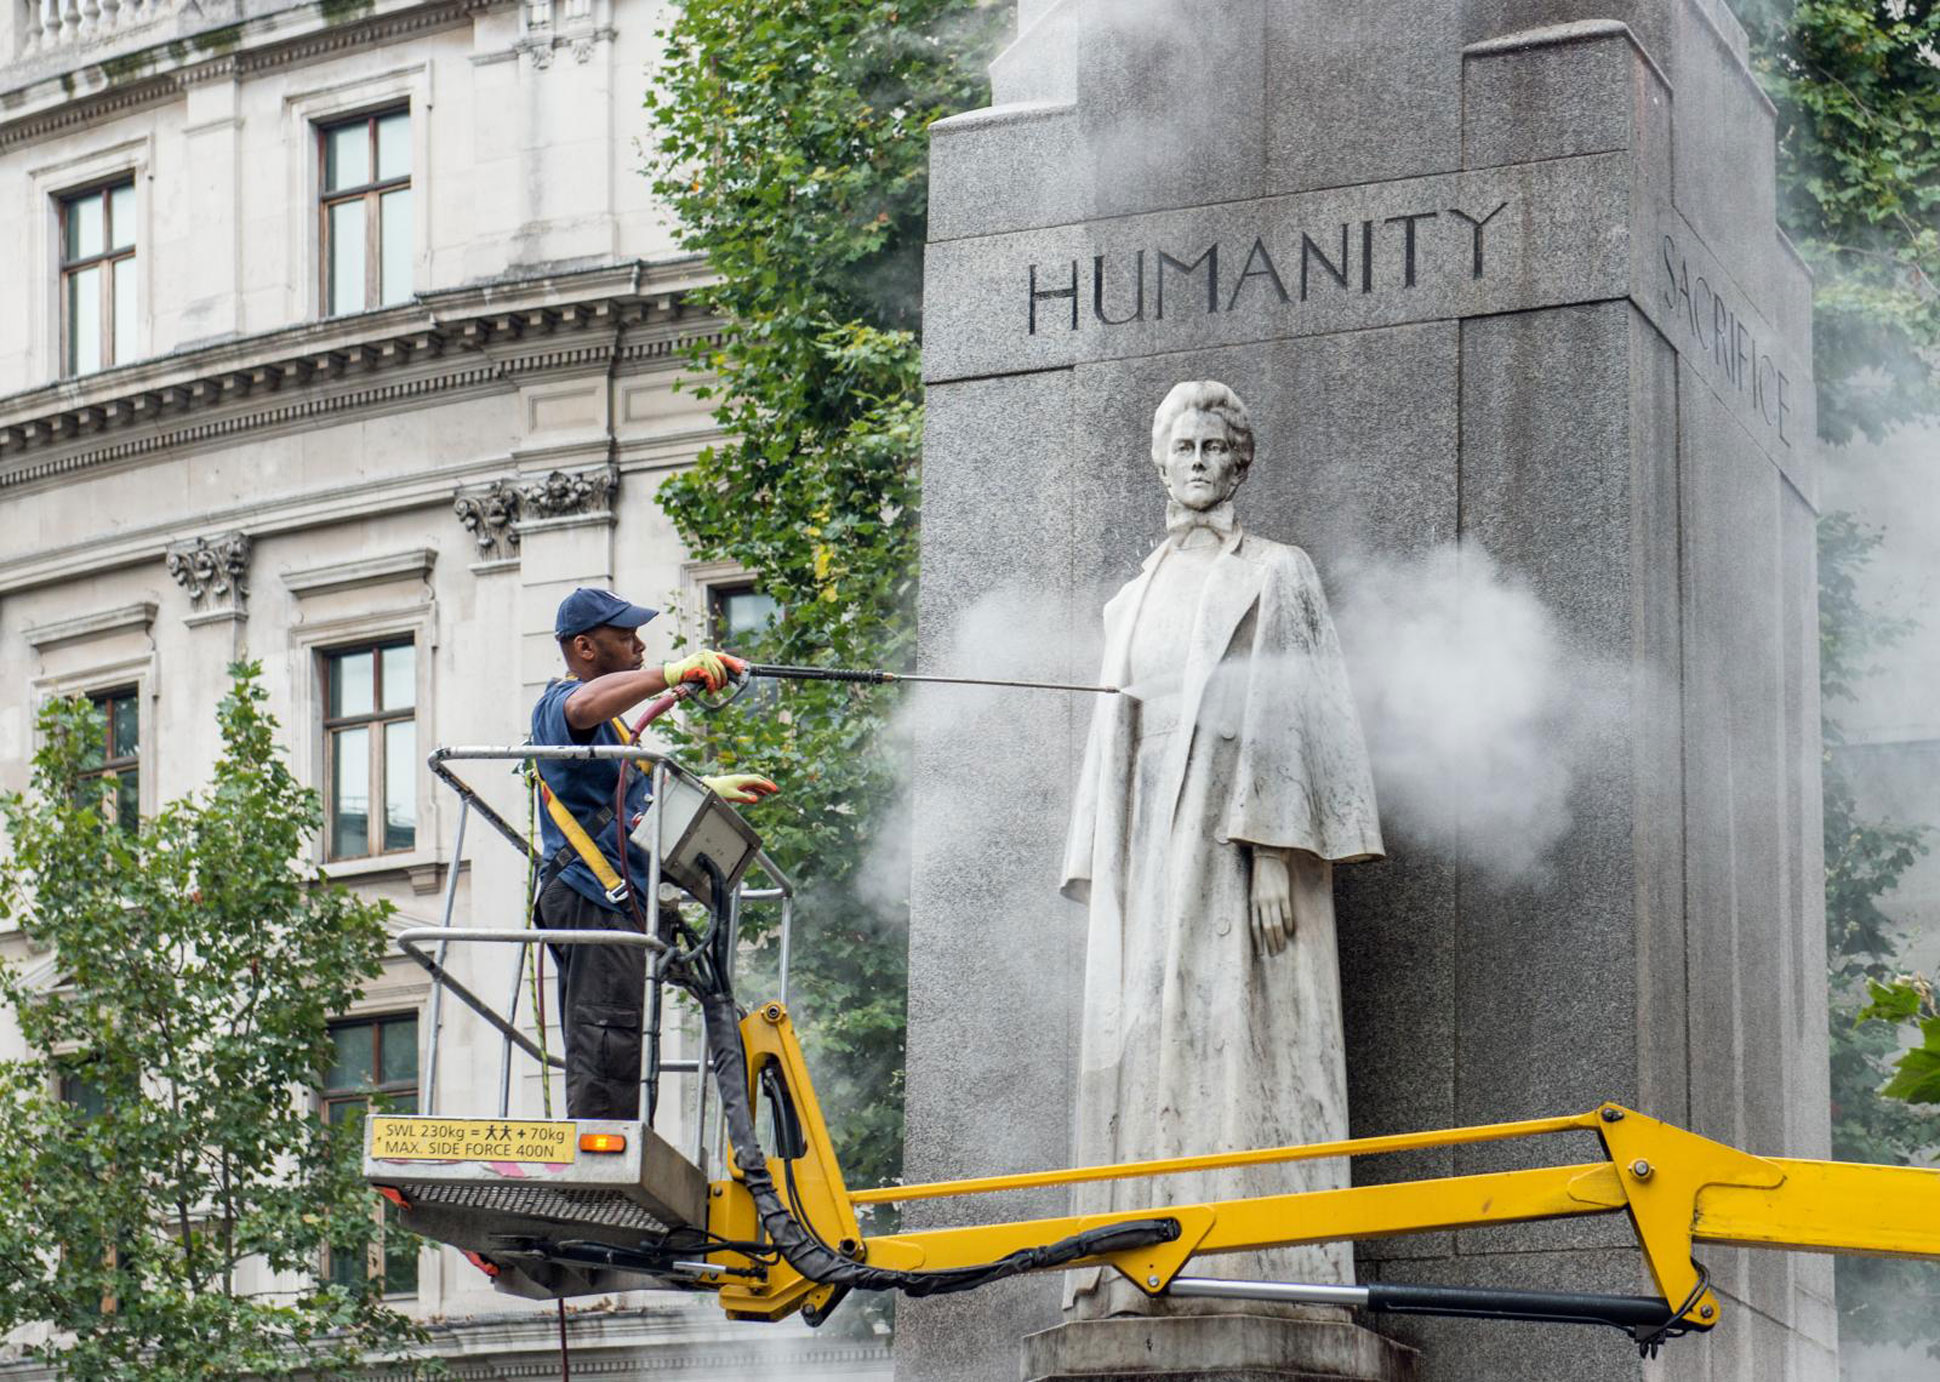 A specialist contractor standing on a cherry picker and cleaning a grey stone memorial to Edith Cavell using a jet wash.